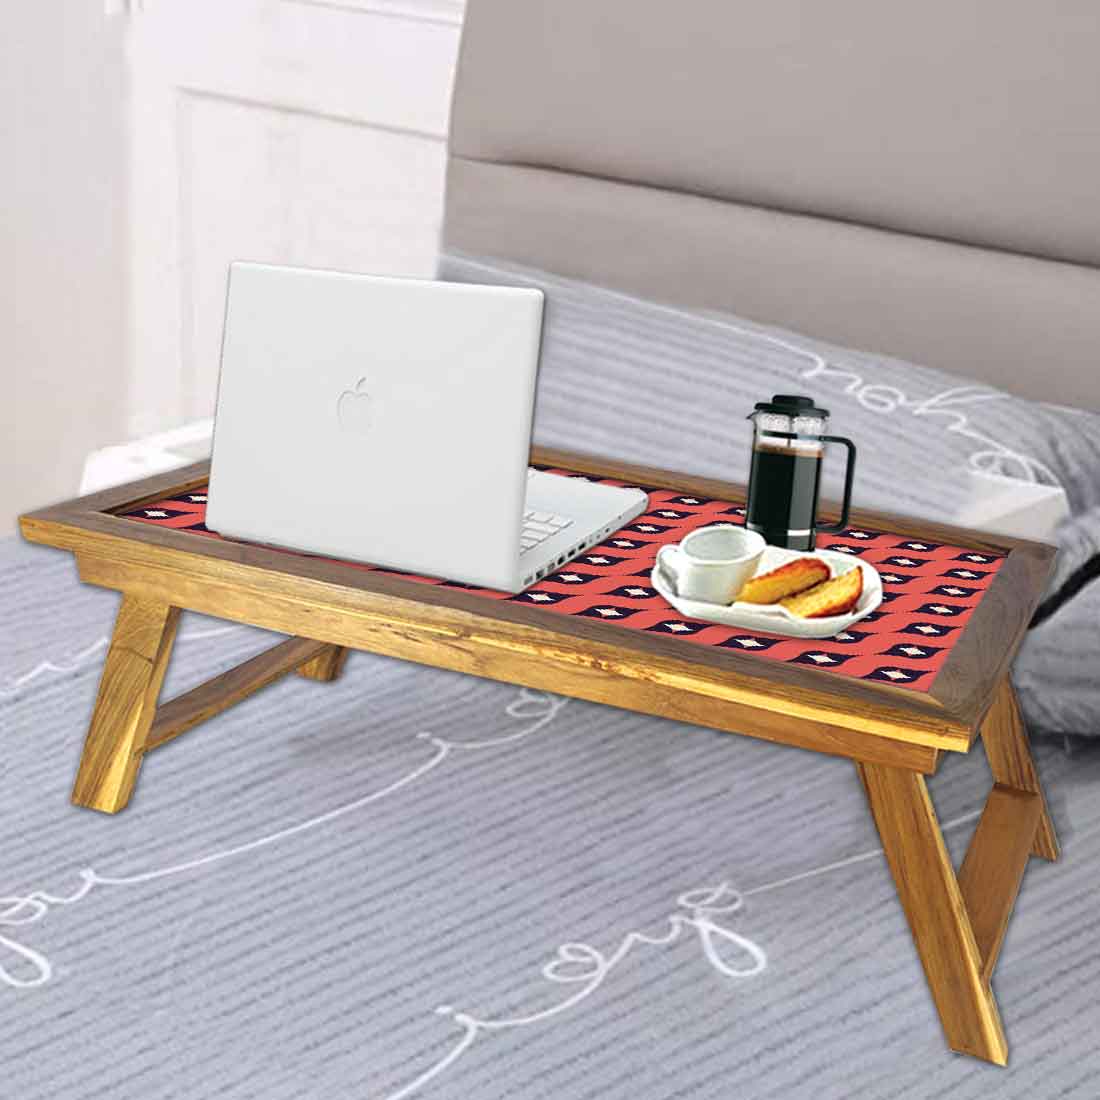 Nutcase Folding Laptop Table For Home Bed Lapdesk Breakfast Table Foldable Teak Wooden Study Desk - Peach Retro Collection Nutcase